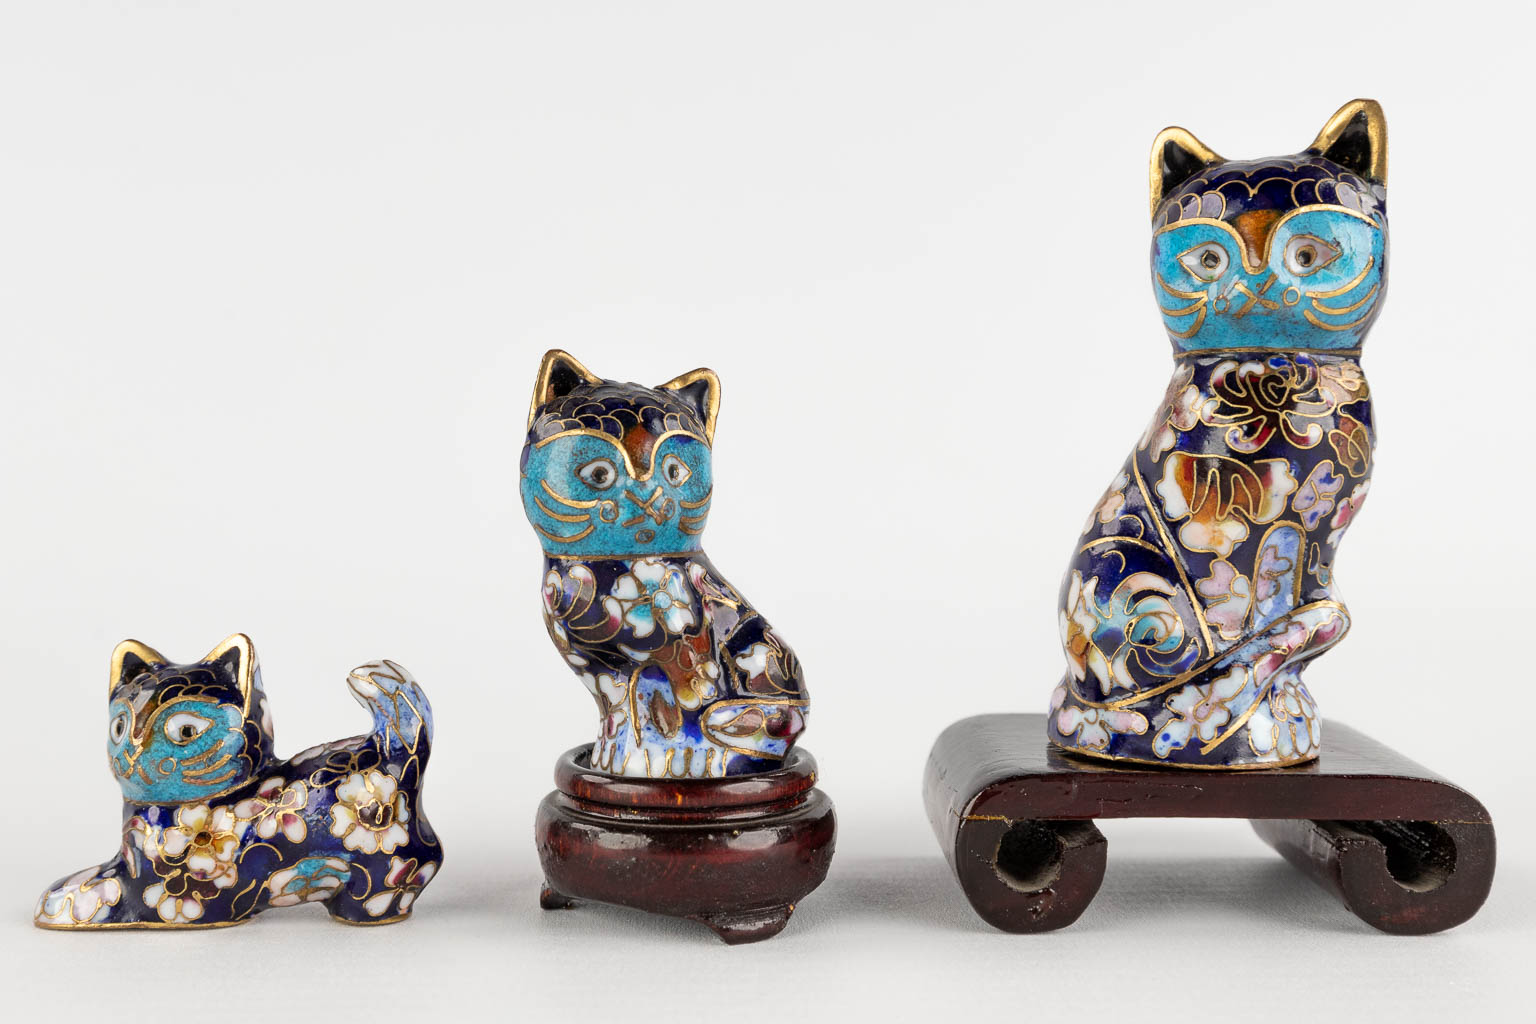 A large collection of 25 items and figurines, cloisonné bronze. 20th C. (H:23 cm)